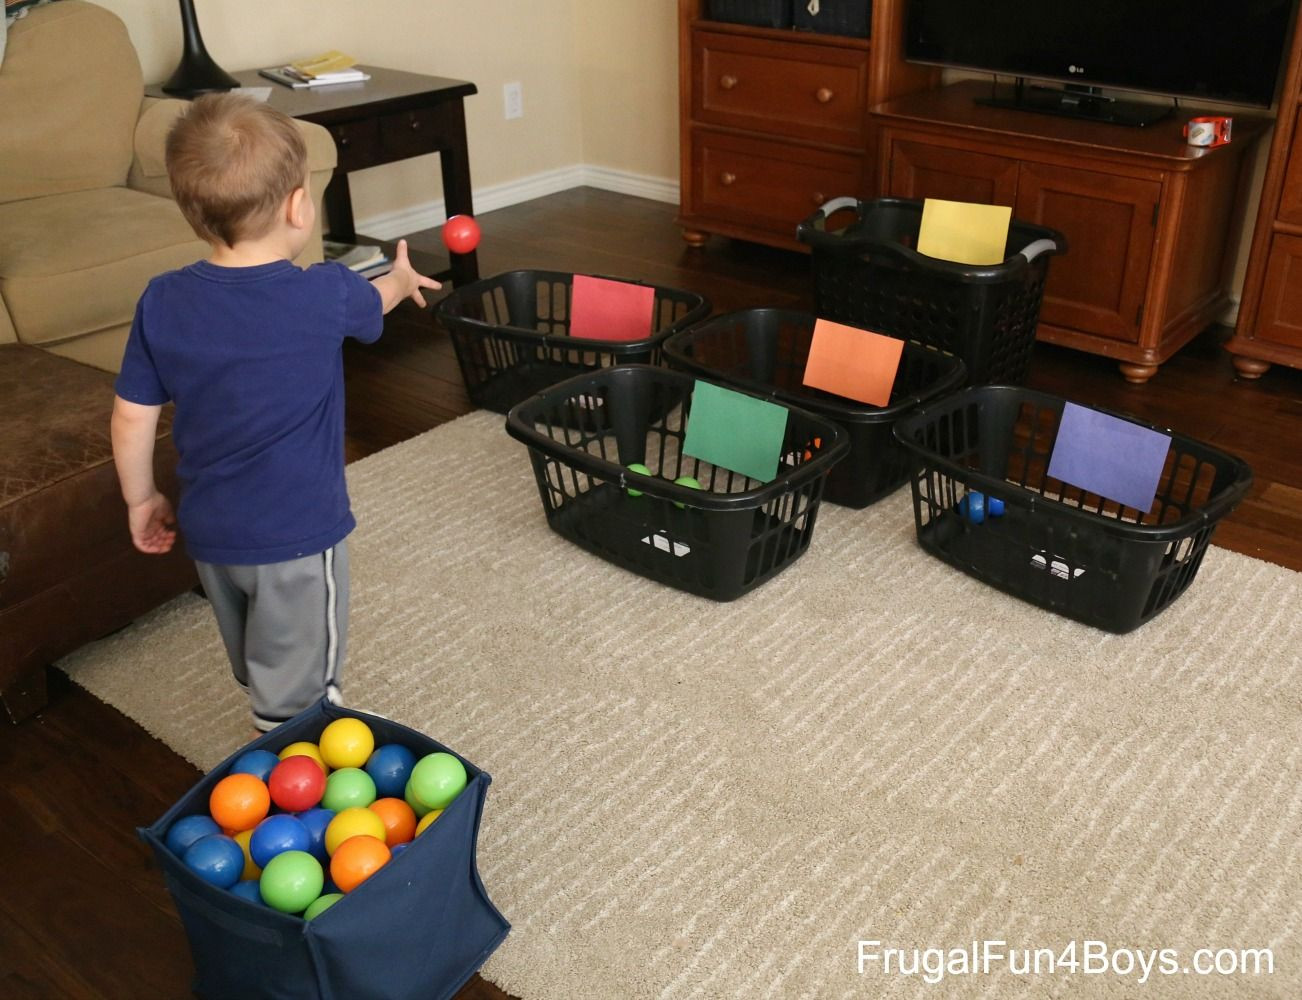 Indoor Active Games For Kids
 10 Ball Games for Kids Ideas for Active Play Indoors